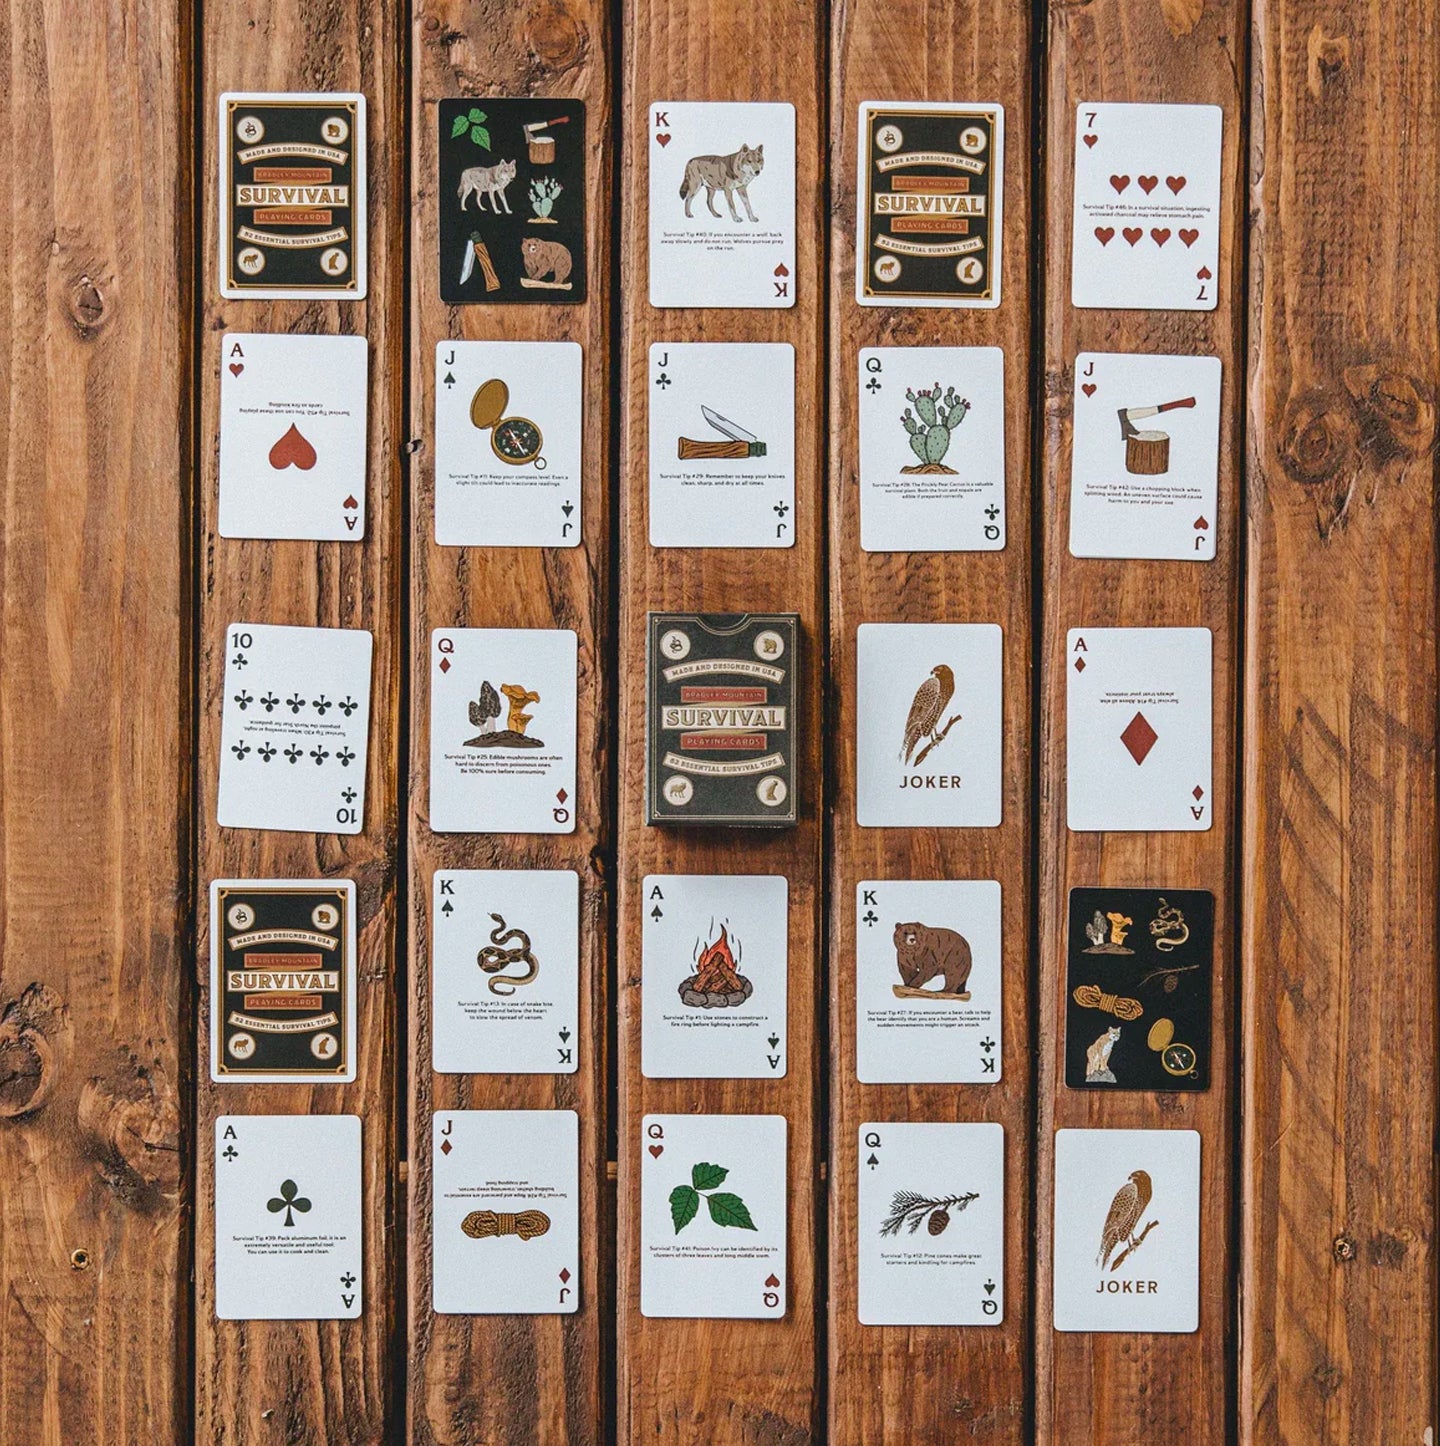 Survival Playing Cards